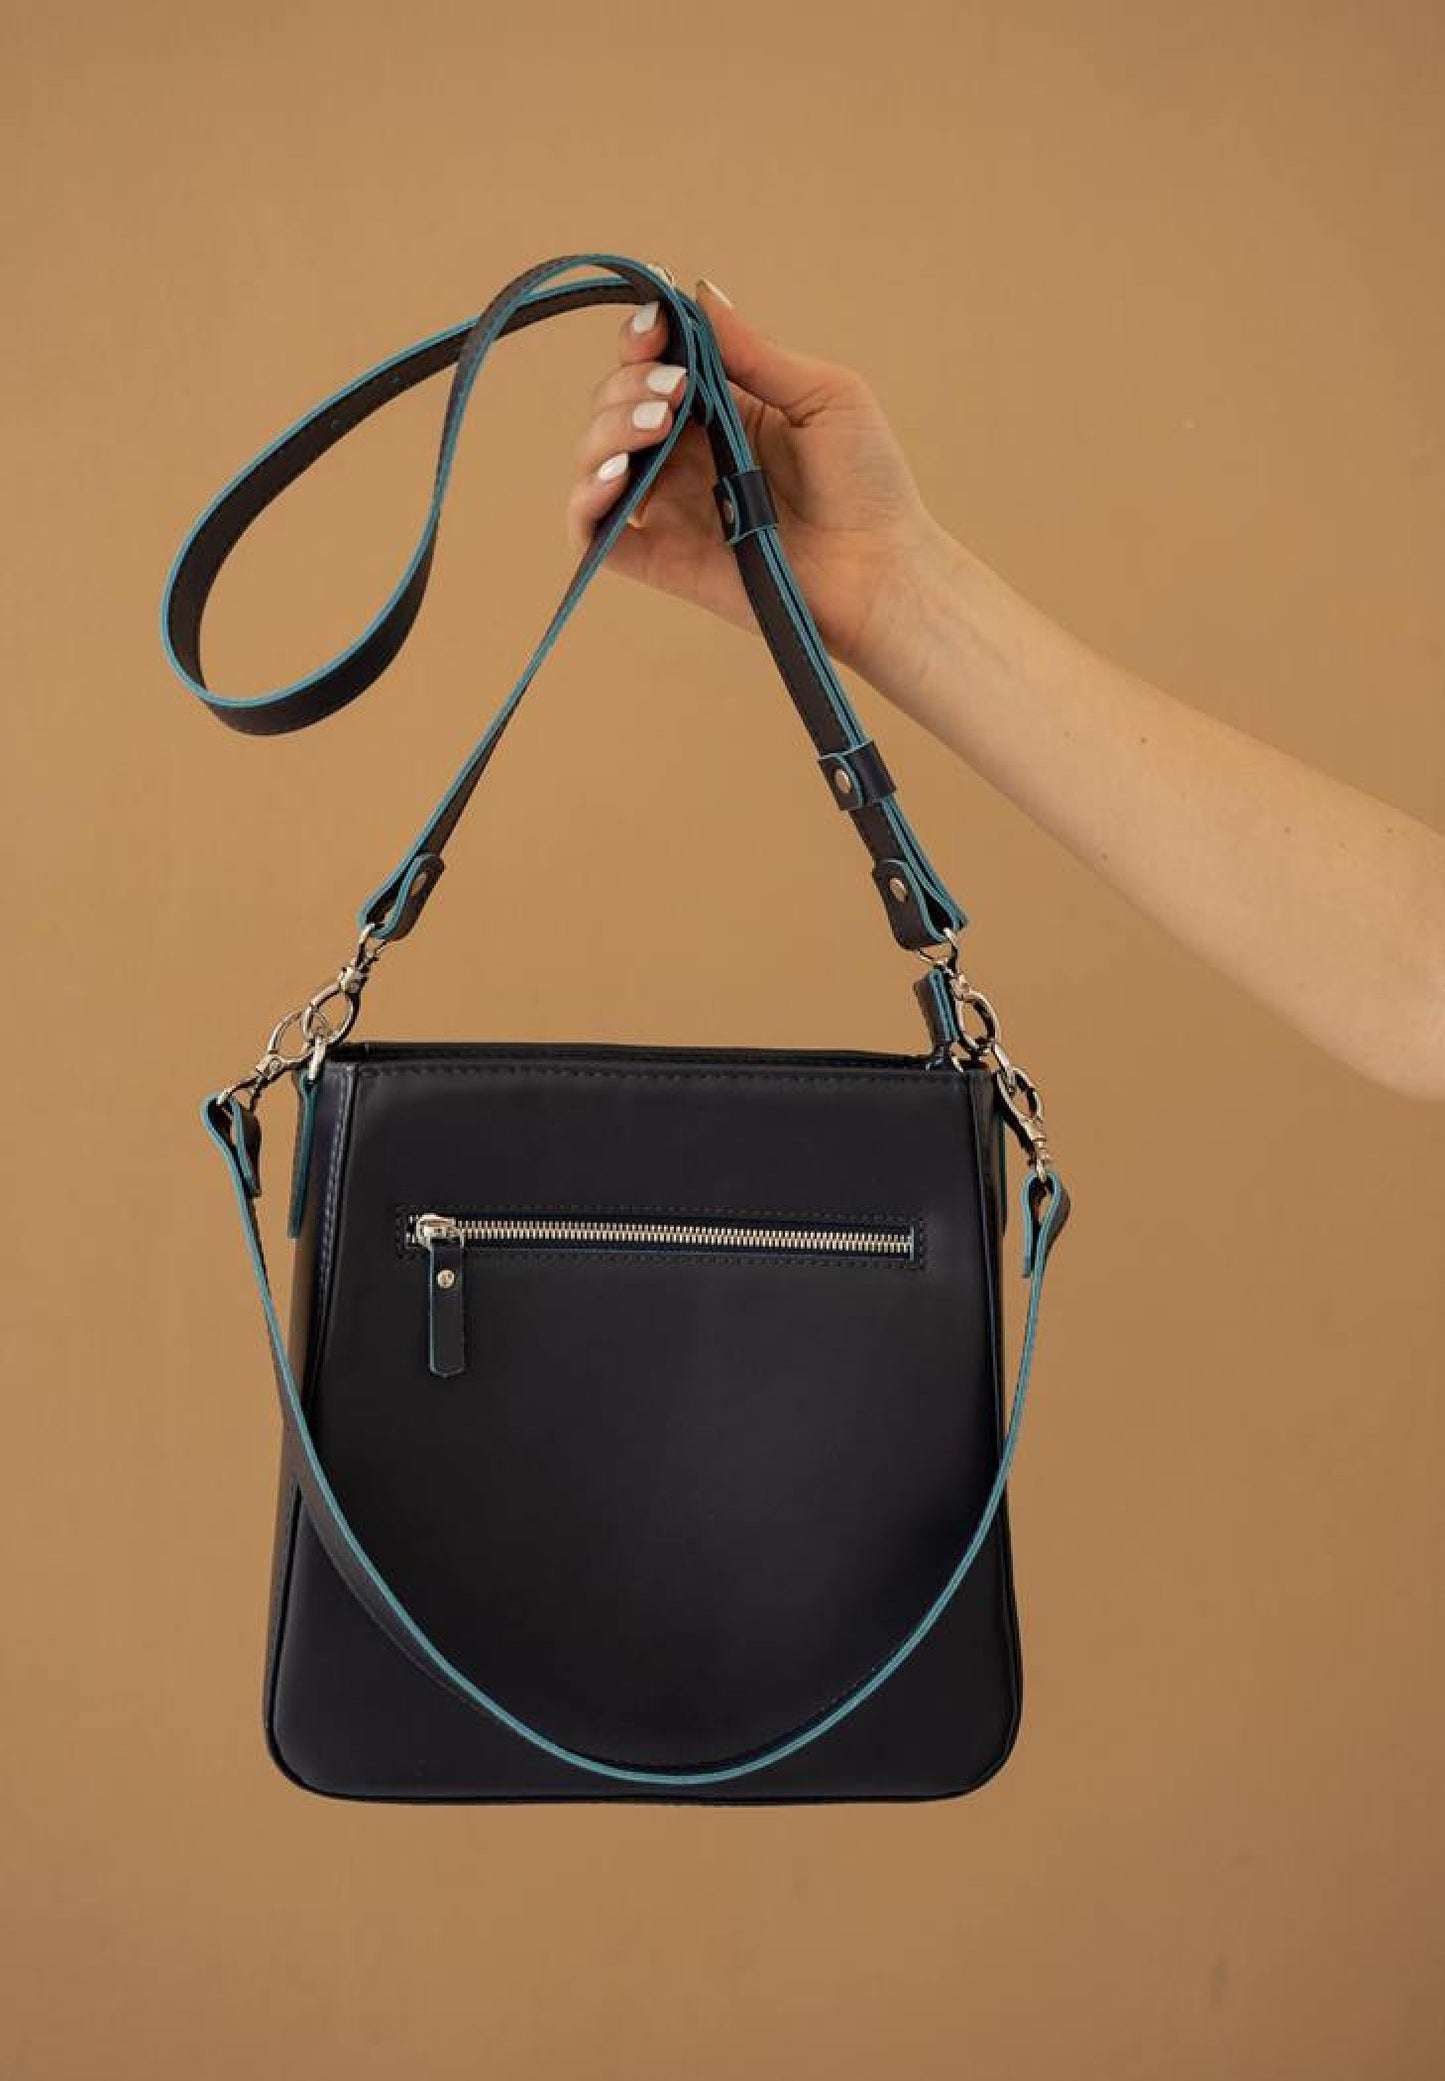 a high quality leather bag for women in navy blue color